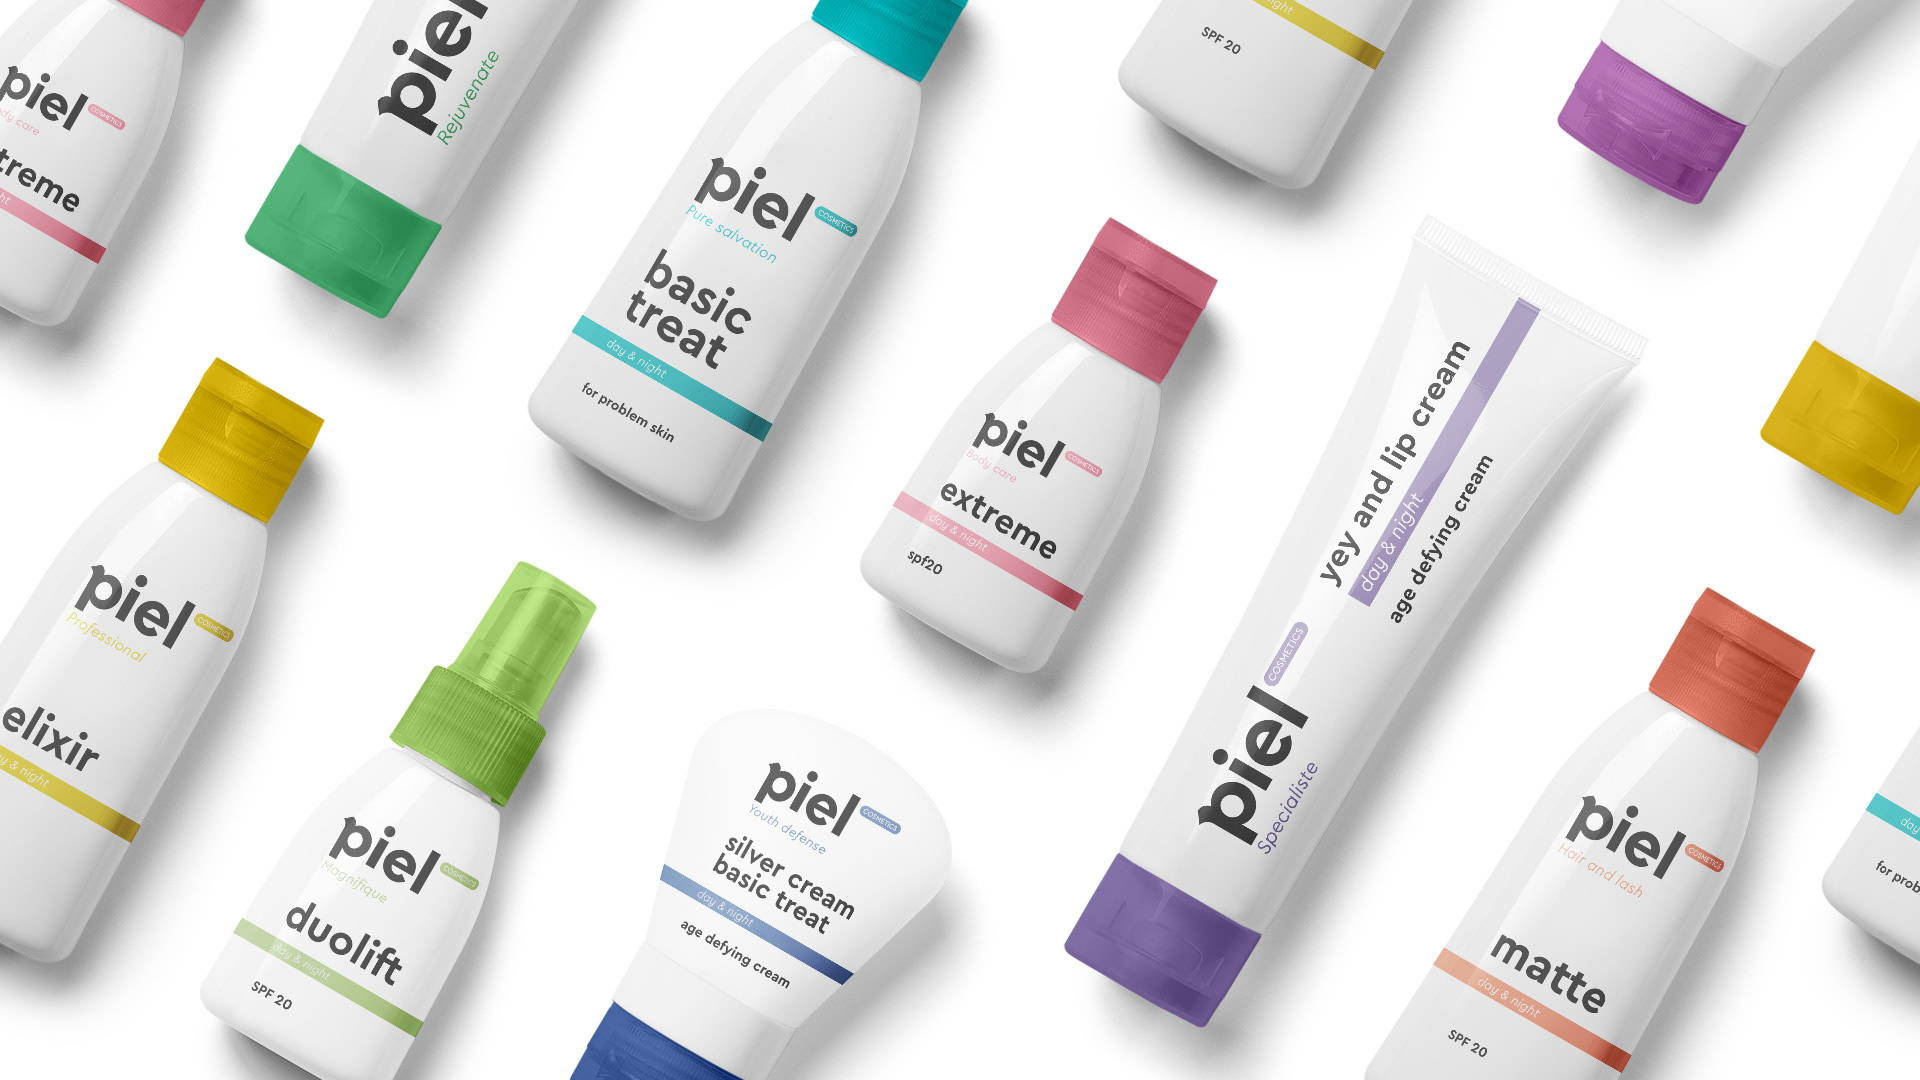 Featured image for Piel Skincare Has a Clean Yet Colorful Look